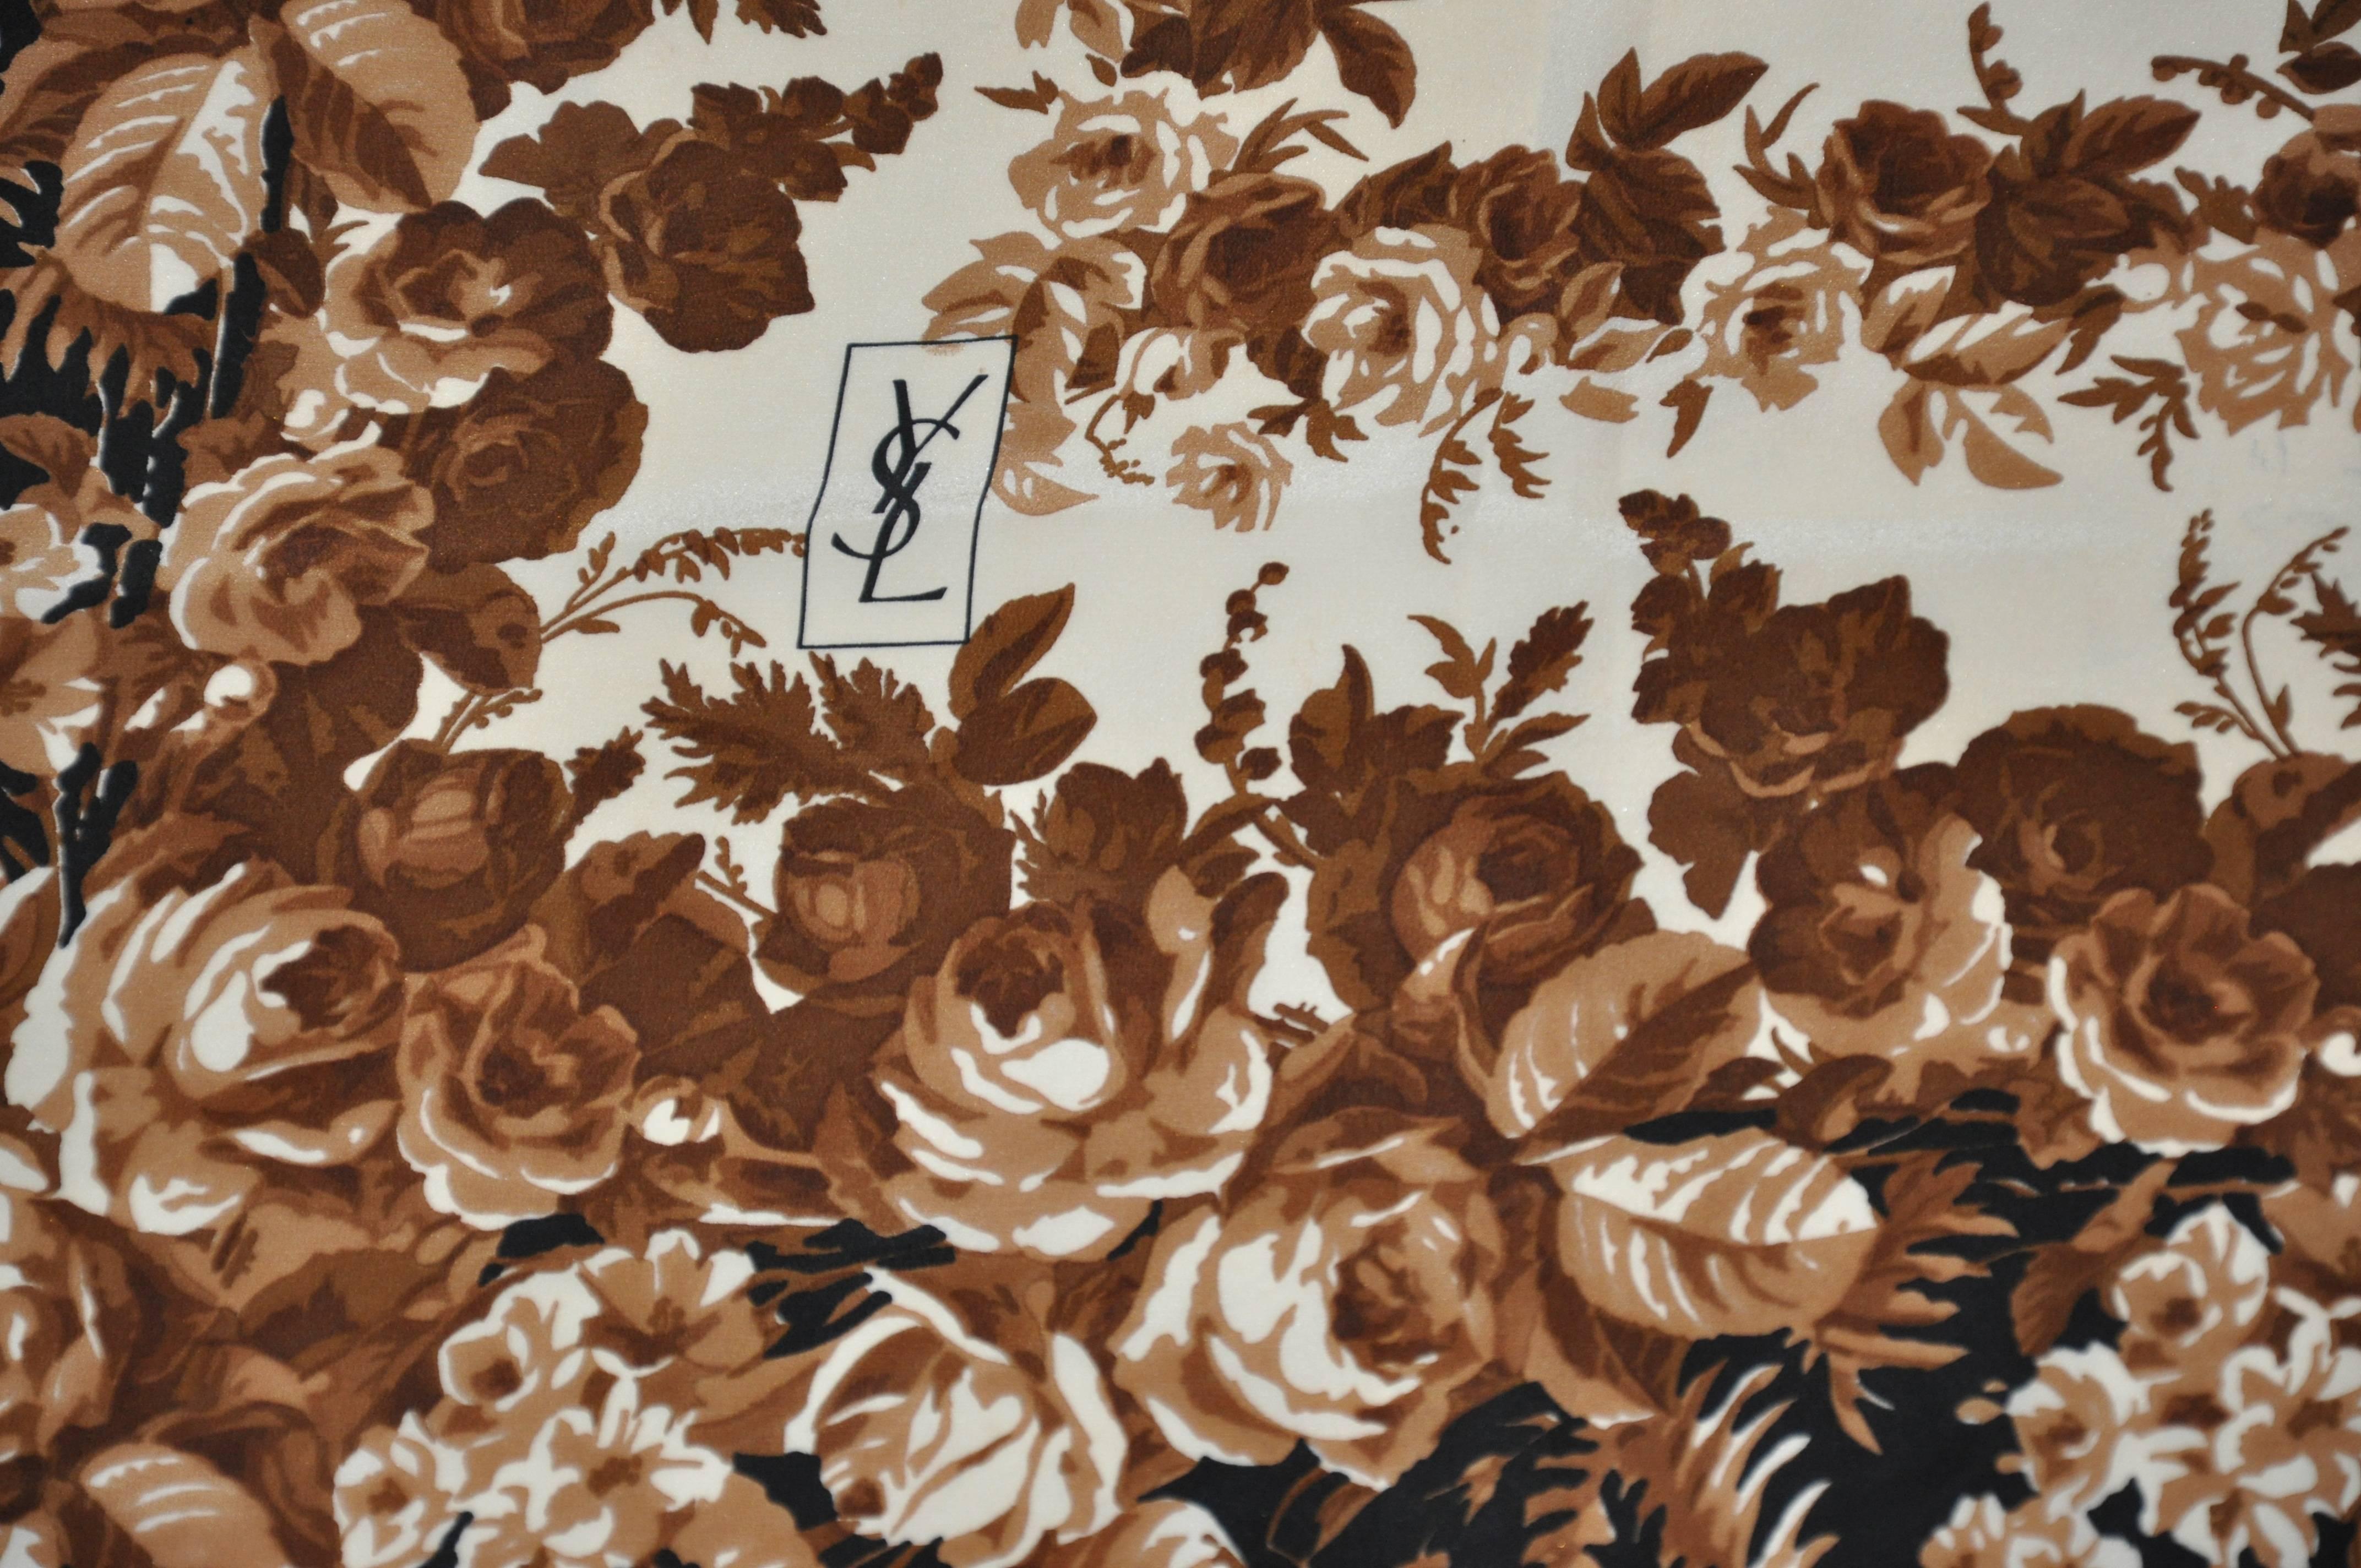 Yves Saint Laurent huge wonderfully elegant silk crepe di chine scarf surrounded with shades of browns floral borders and fringe and accented with a center of cream and brown polka dots. This wonderful scarf measures 56